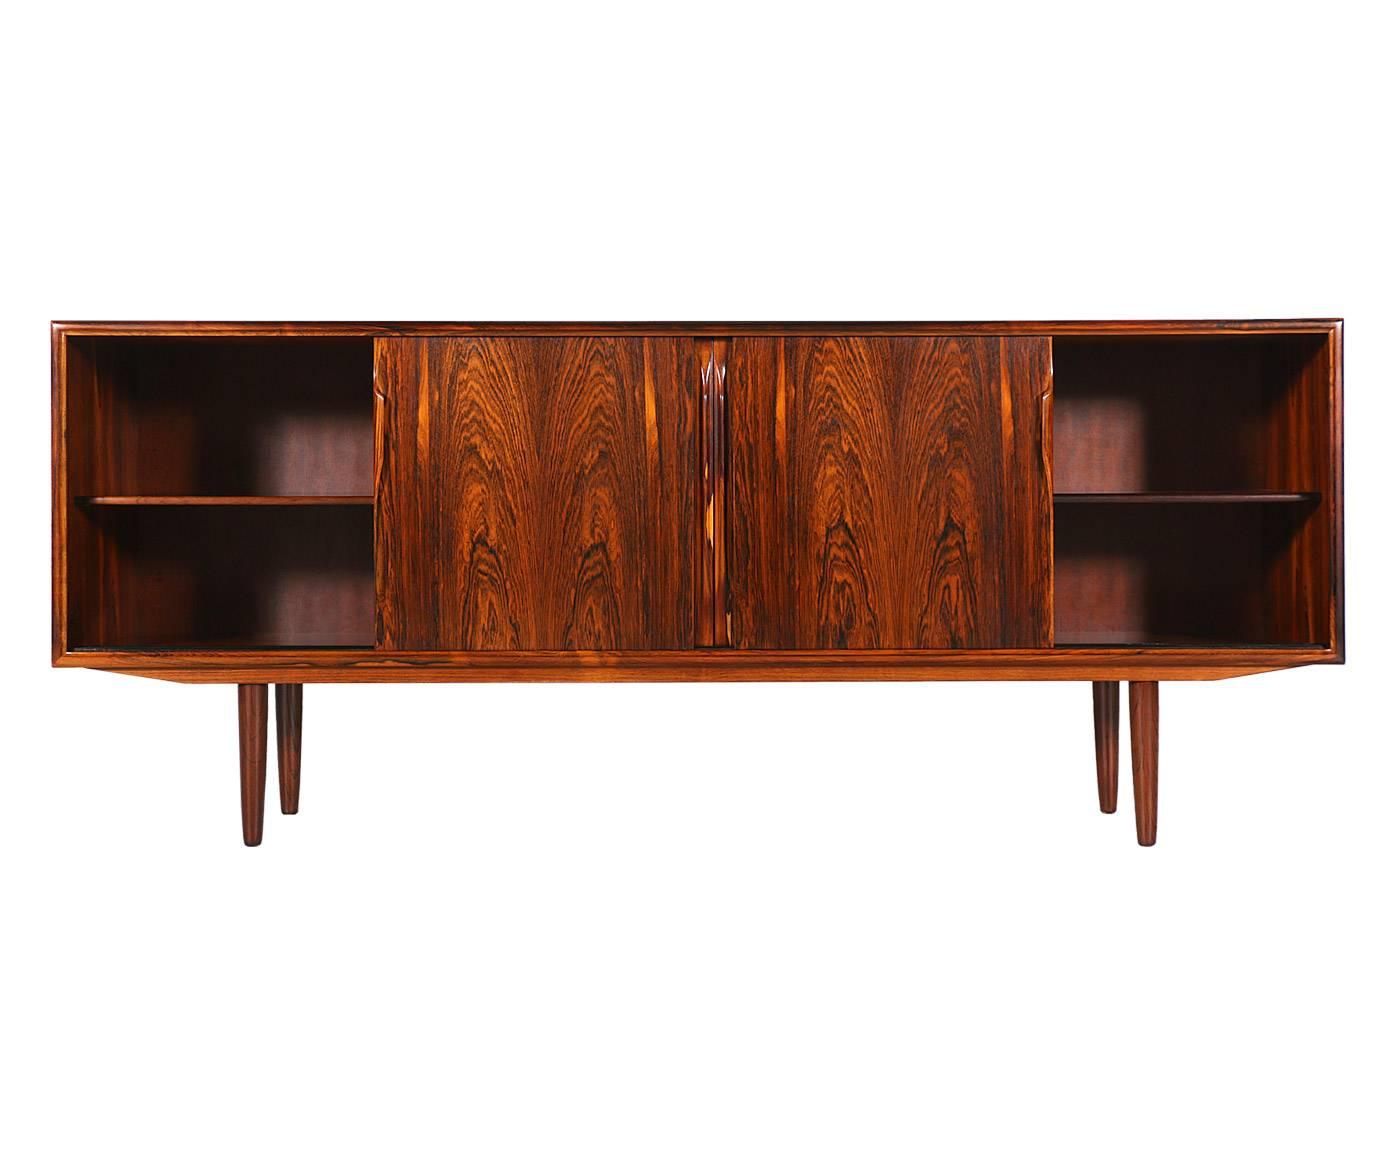 Designer: Axel Christensen.
Manufacturer: Axel Christensen.
Period/Style: Danish Modern.
Country: Denmark.
Date: 1950s.

Dimensions: 32.5″H x 78.75″L x 18″W.
Materials: Brazilian rosewood.
Condition: Excellent, newly refinished.
Number of